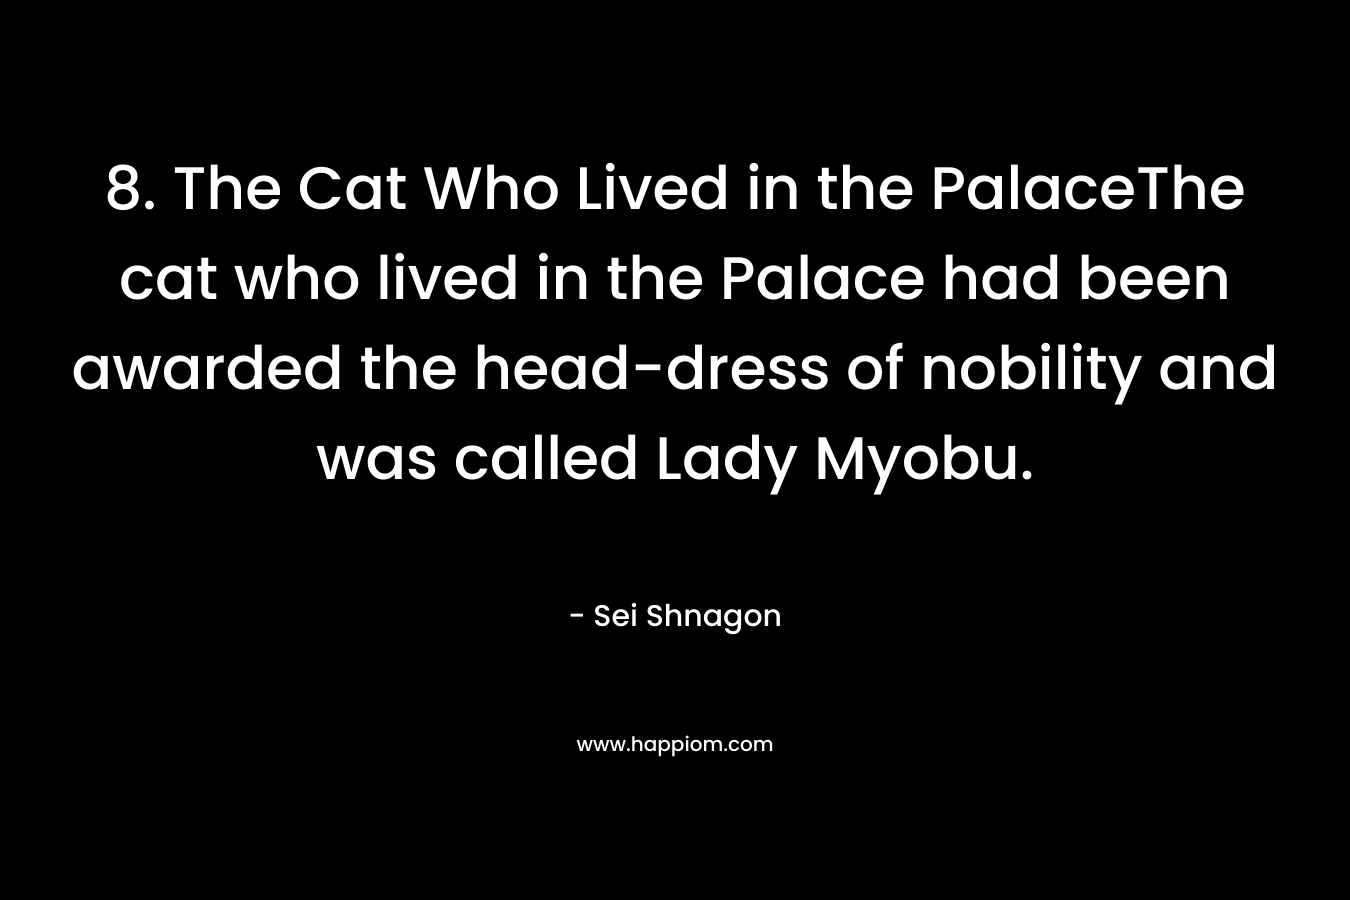 8. The Cat Who Lived in the PalaceThe cat who lived in the Palace had been awarded the head-dress of nobility and was called Lady Myobu.